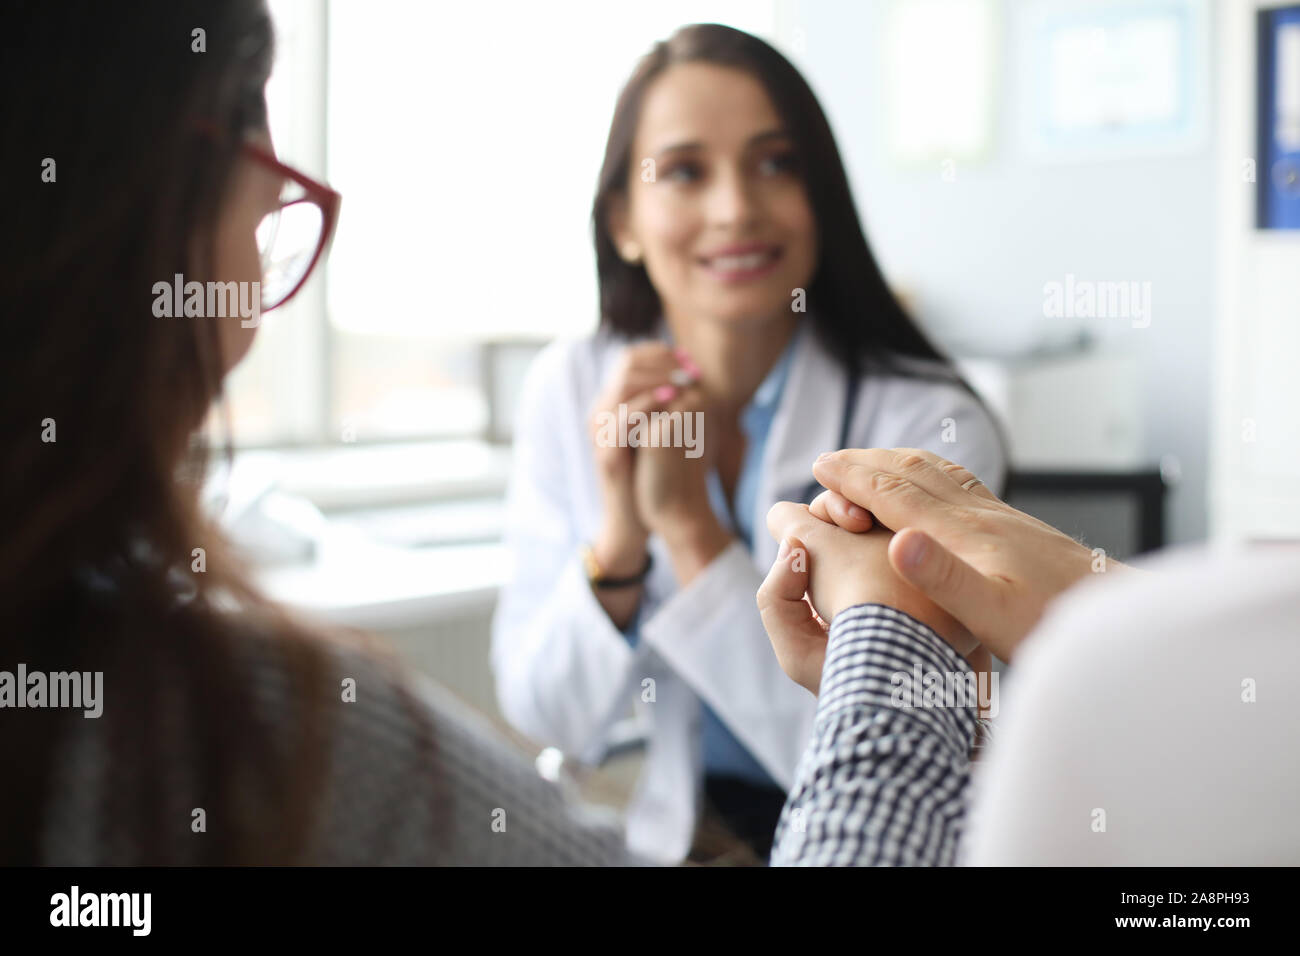 Patients visiting doctor Stock Photo